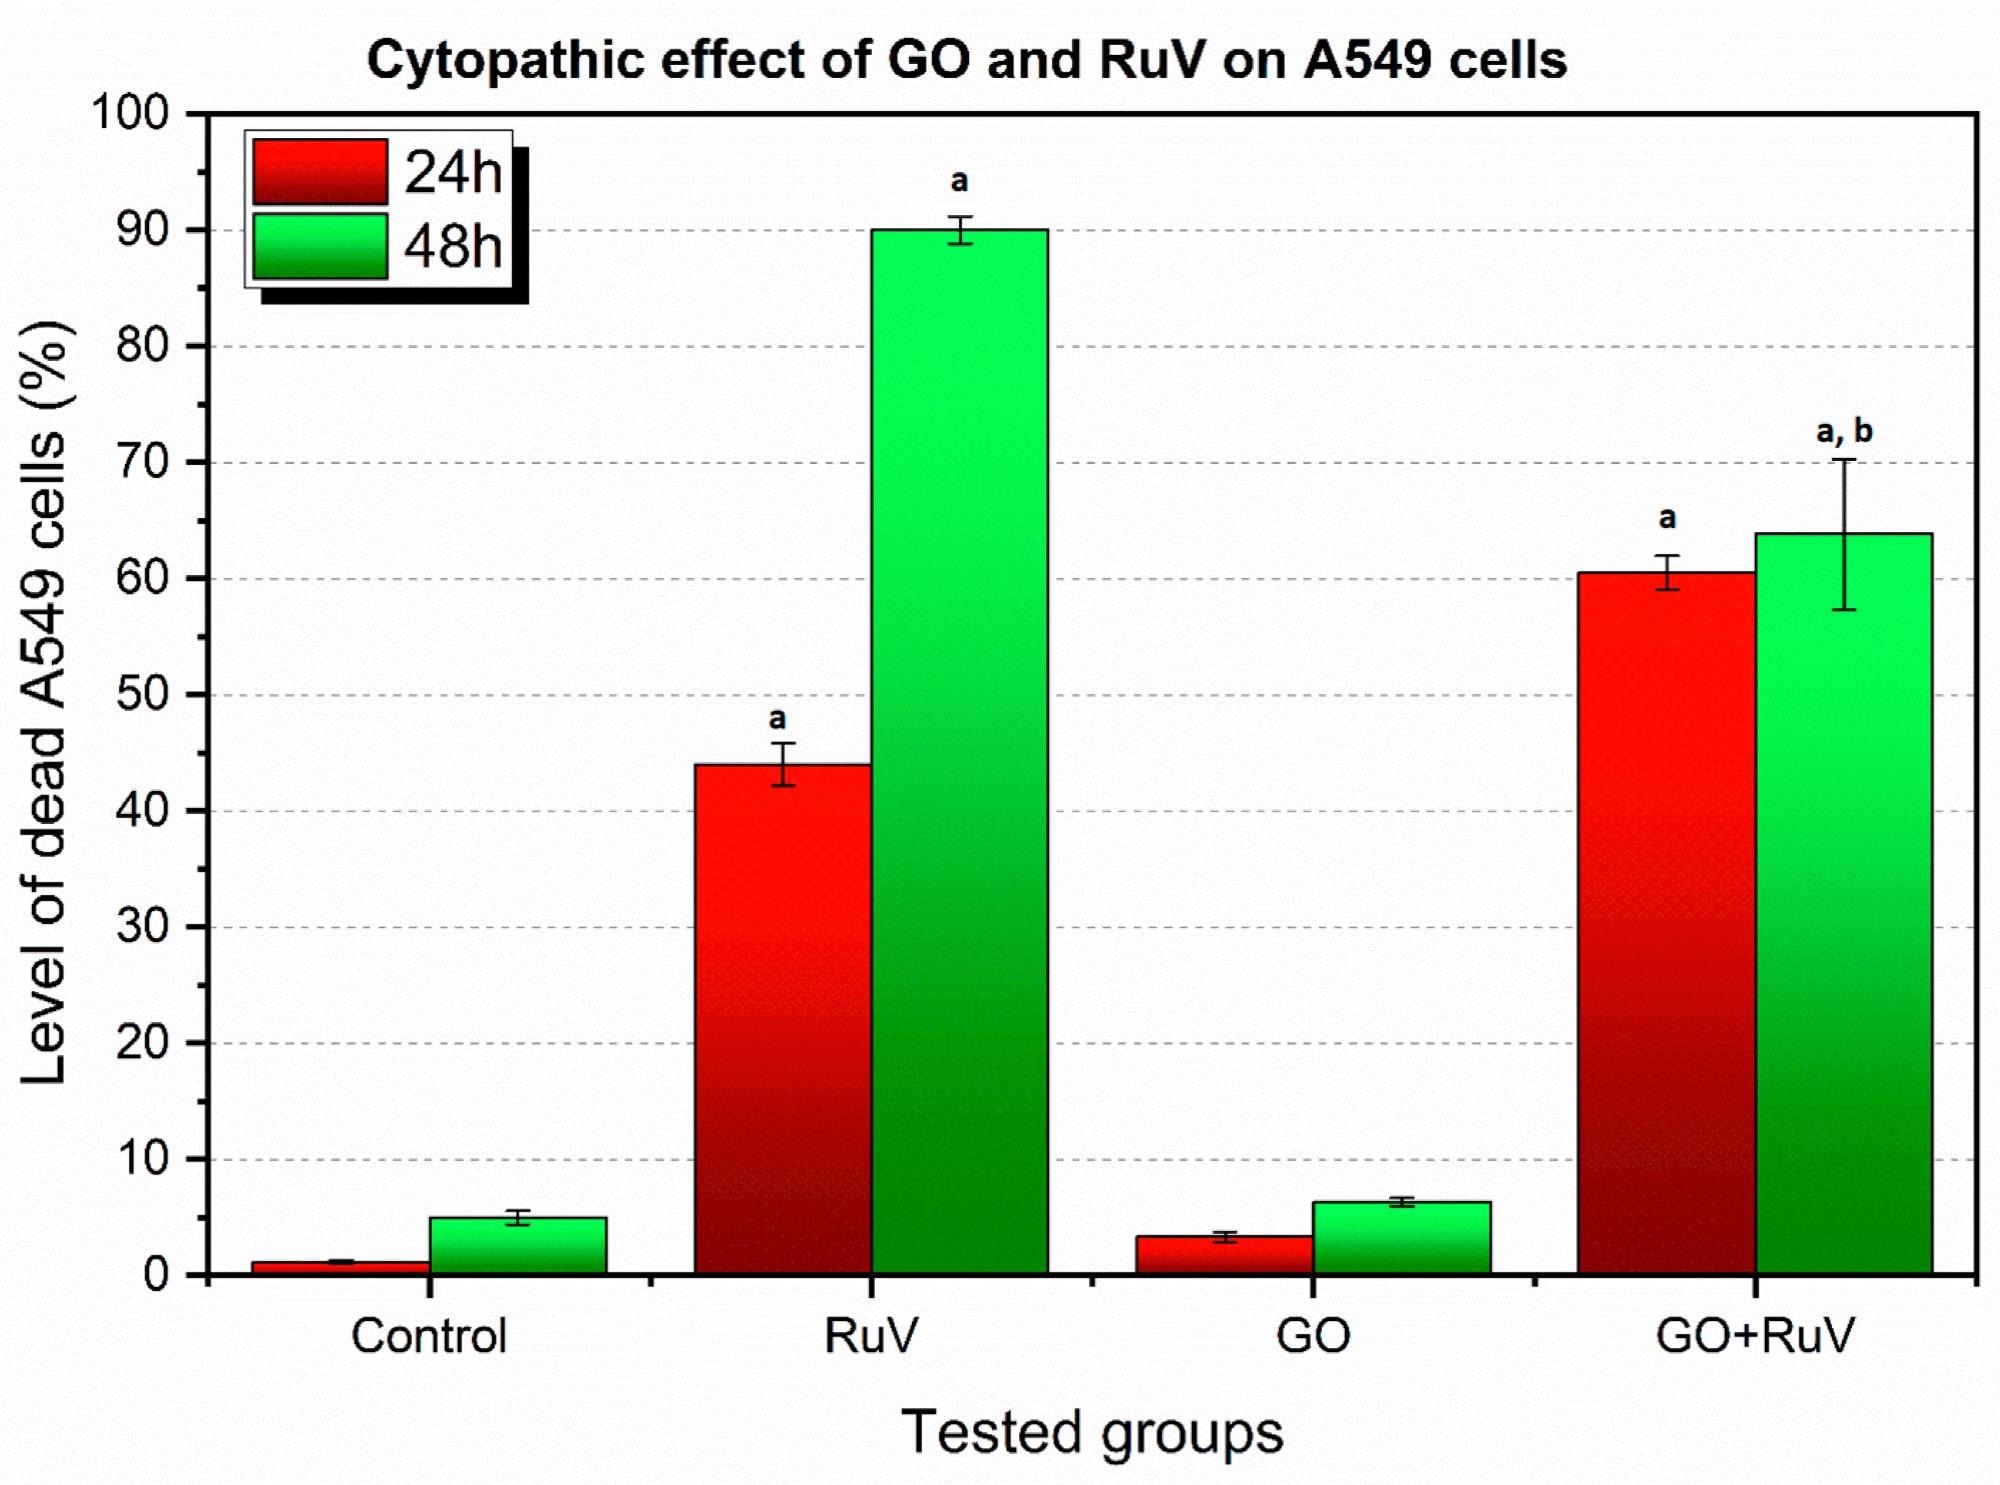 Percentage of cytopathic effect in A549 cell line. RuV—cells infected with RuV, GO—cells with graphene added, GO + RuV—cells infected with RuV and with graphene added. Statistical significance at p < 0.05, a: when compared to control group; b: when compared to RuV group.